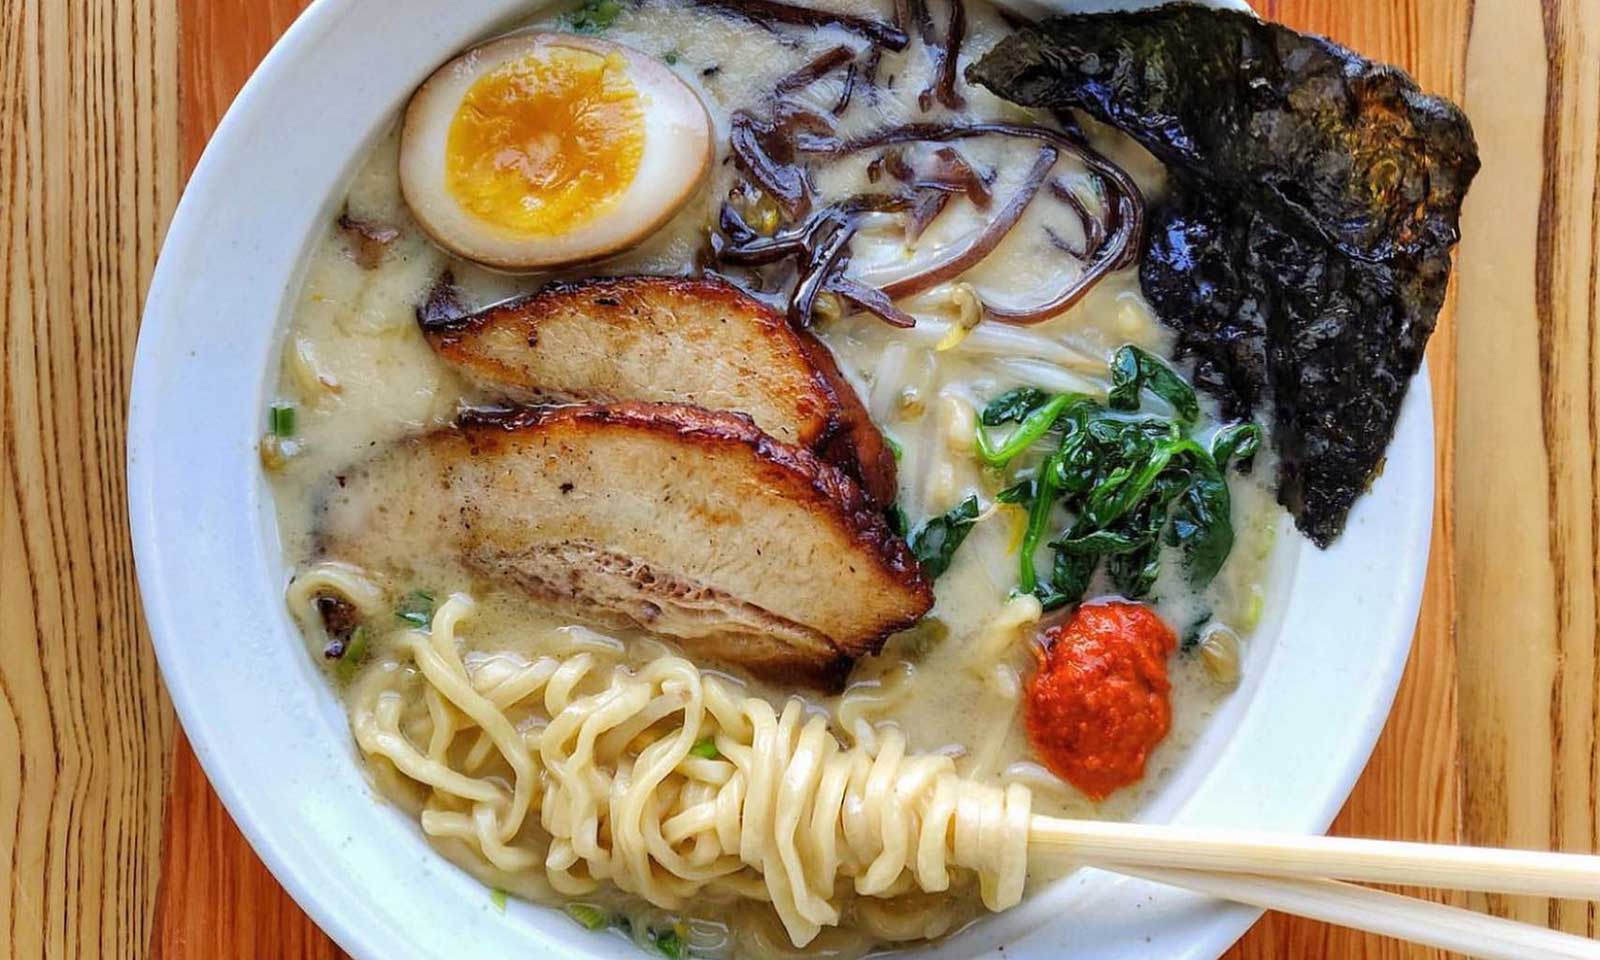 For all you ramen lovers out there